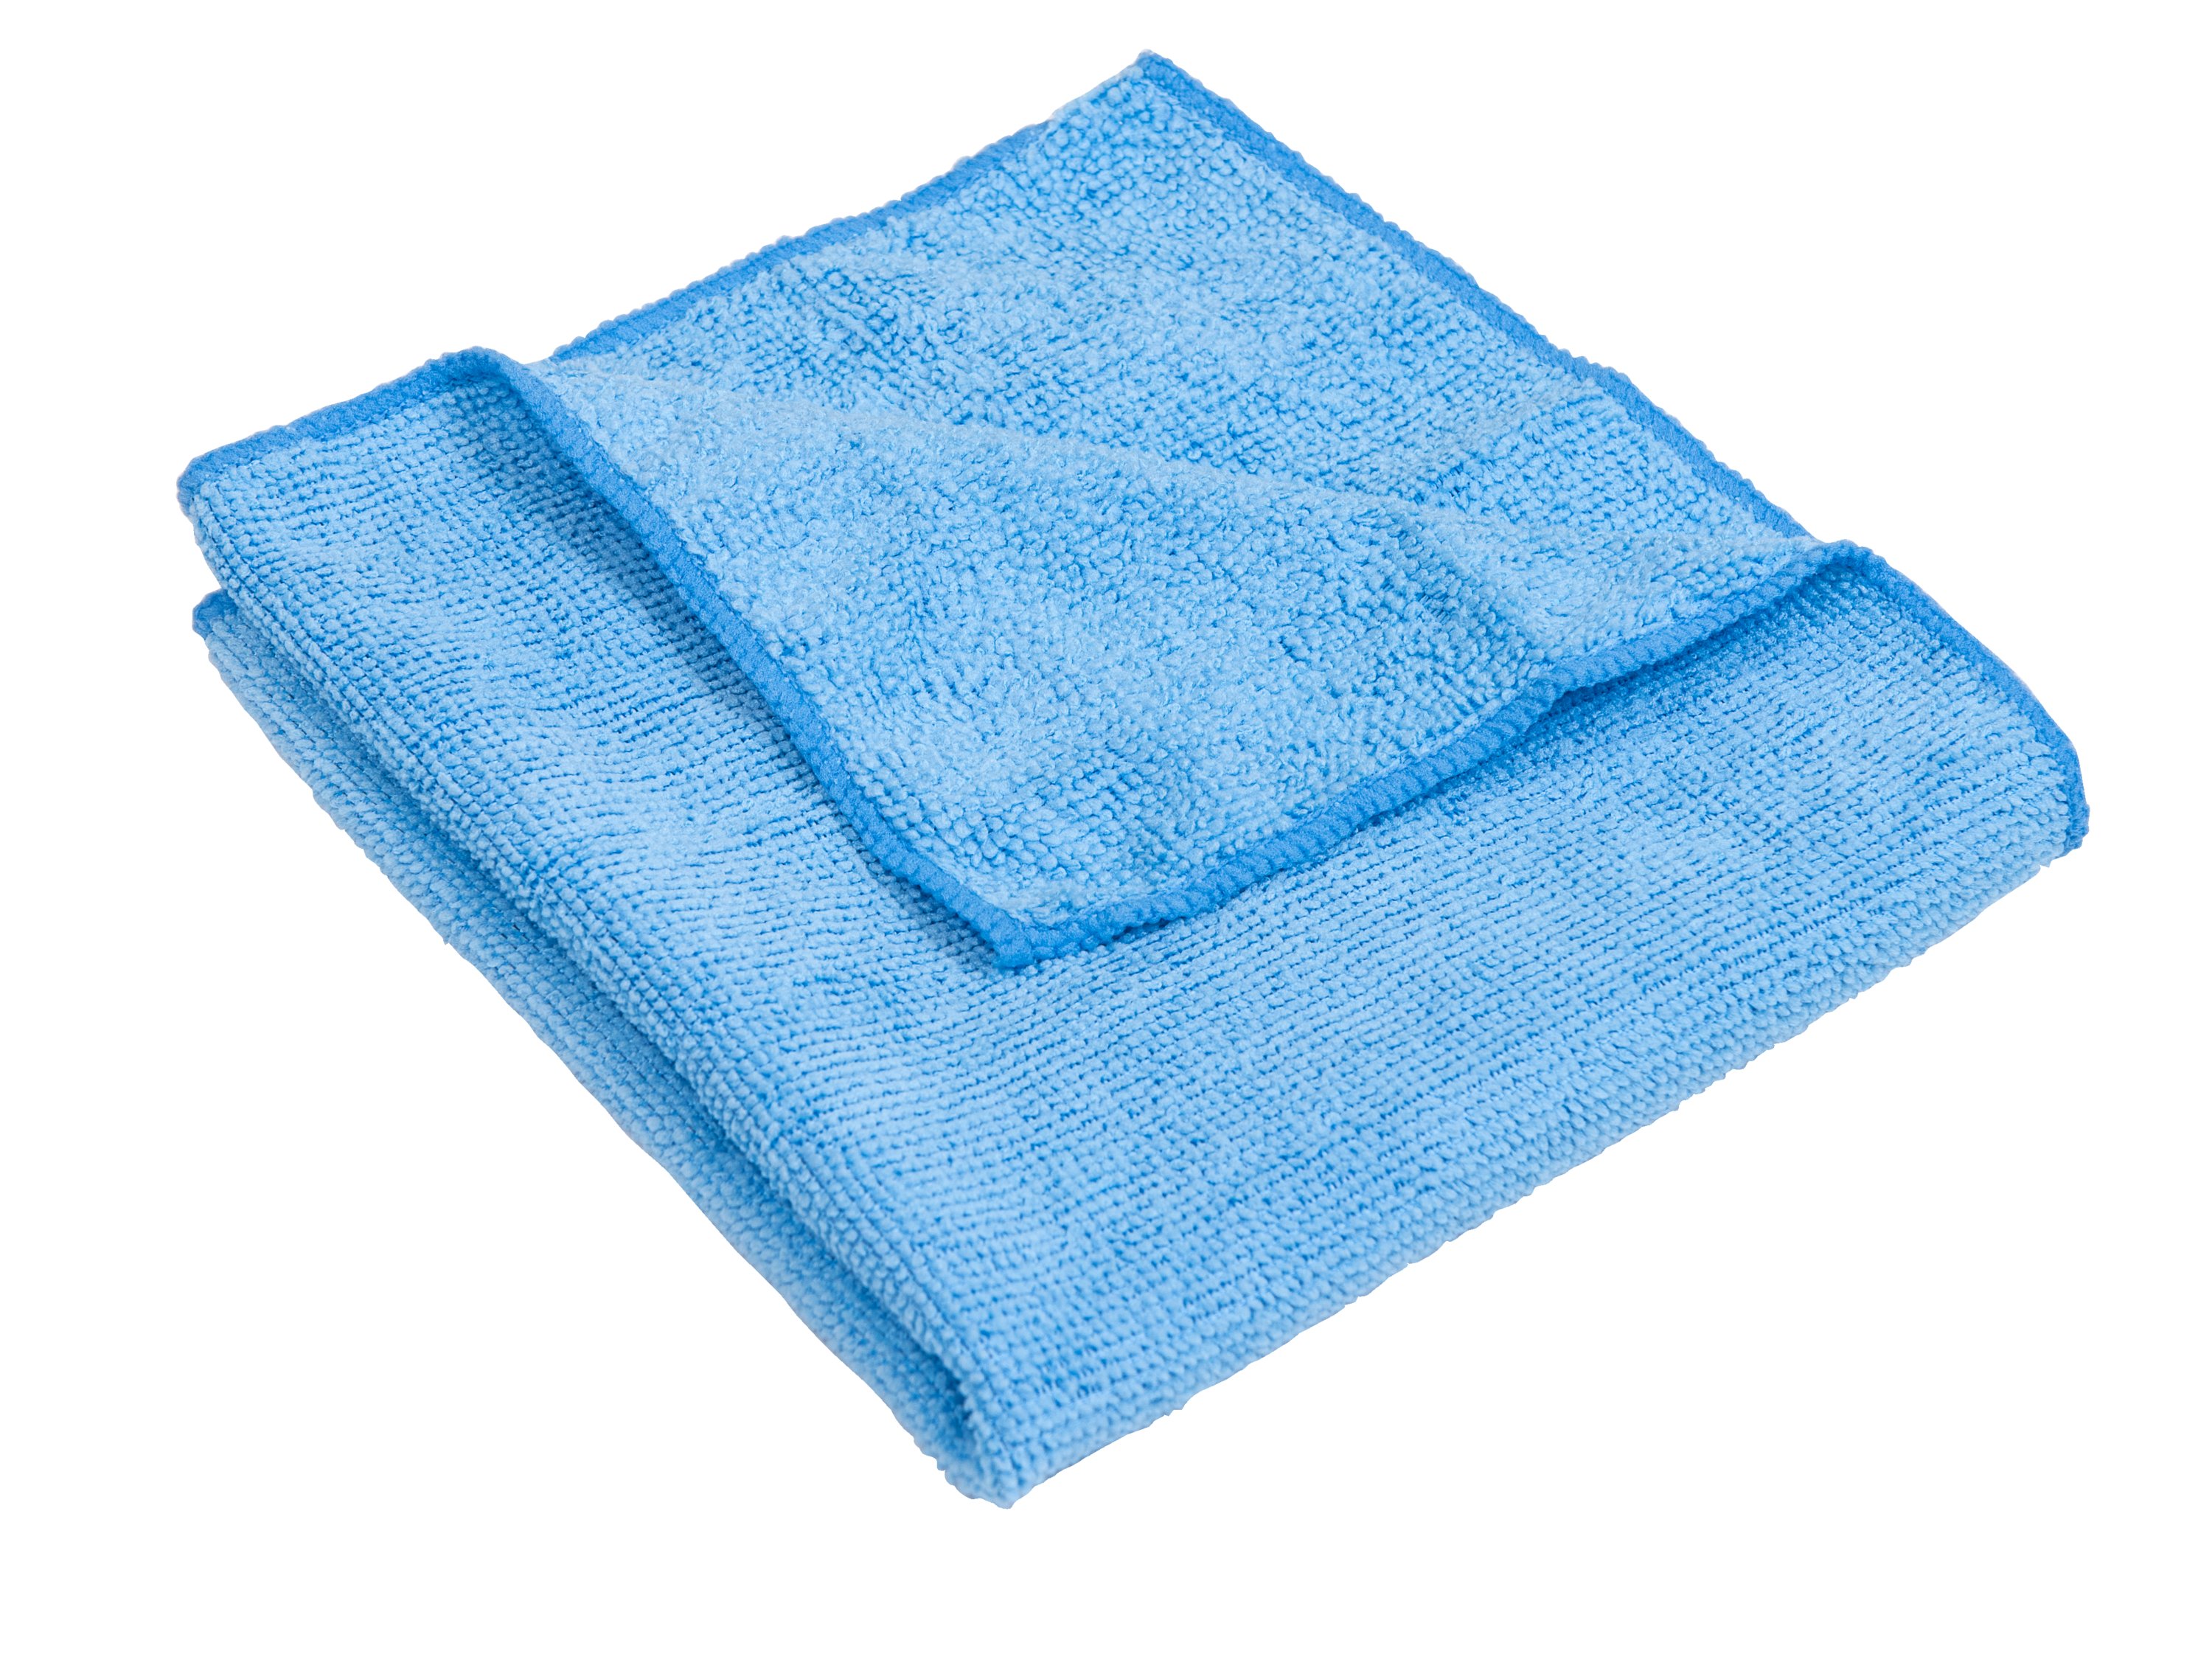 24-Pack New Quickie Original Microfiber Towel Free Shipping 